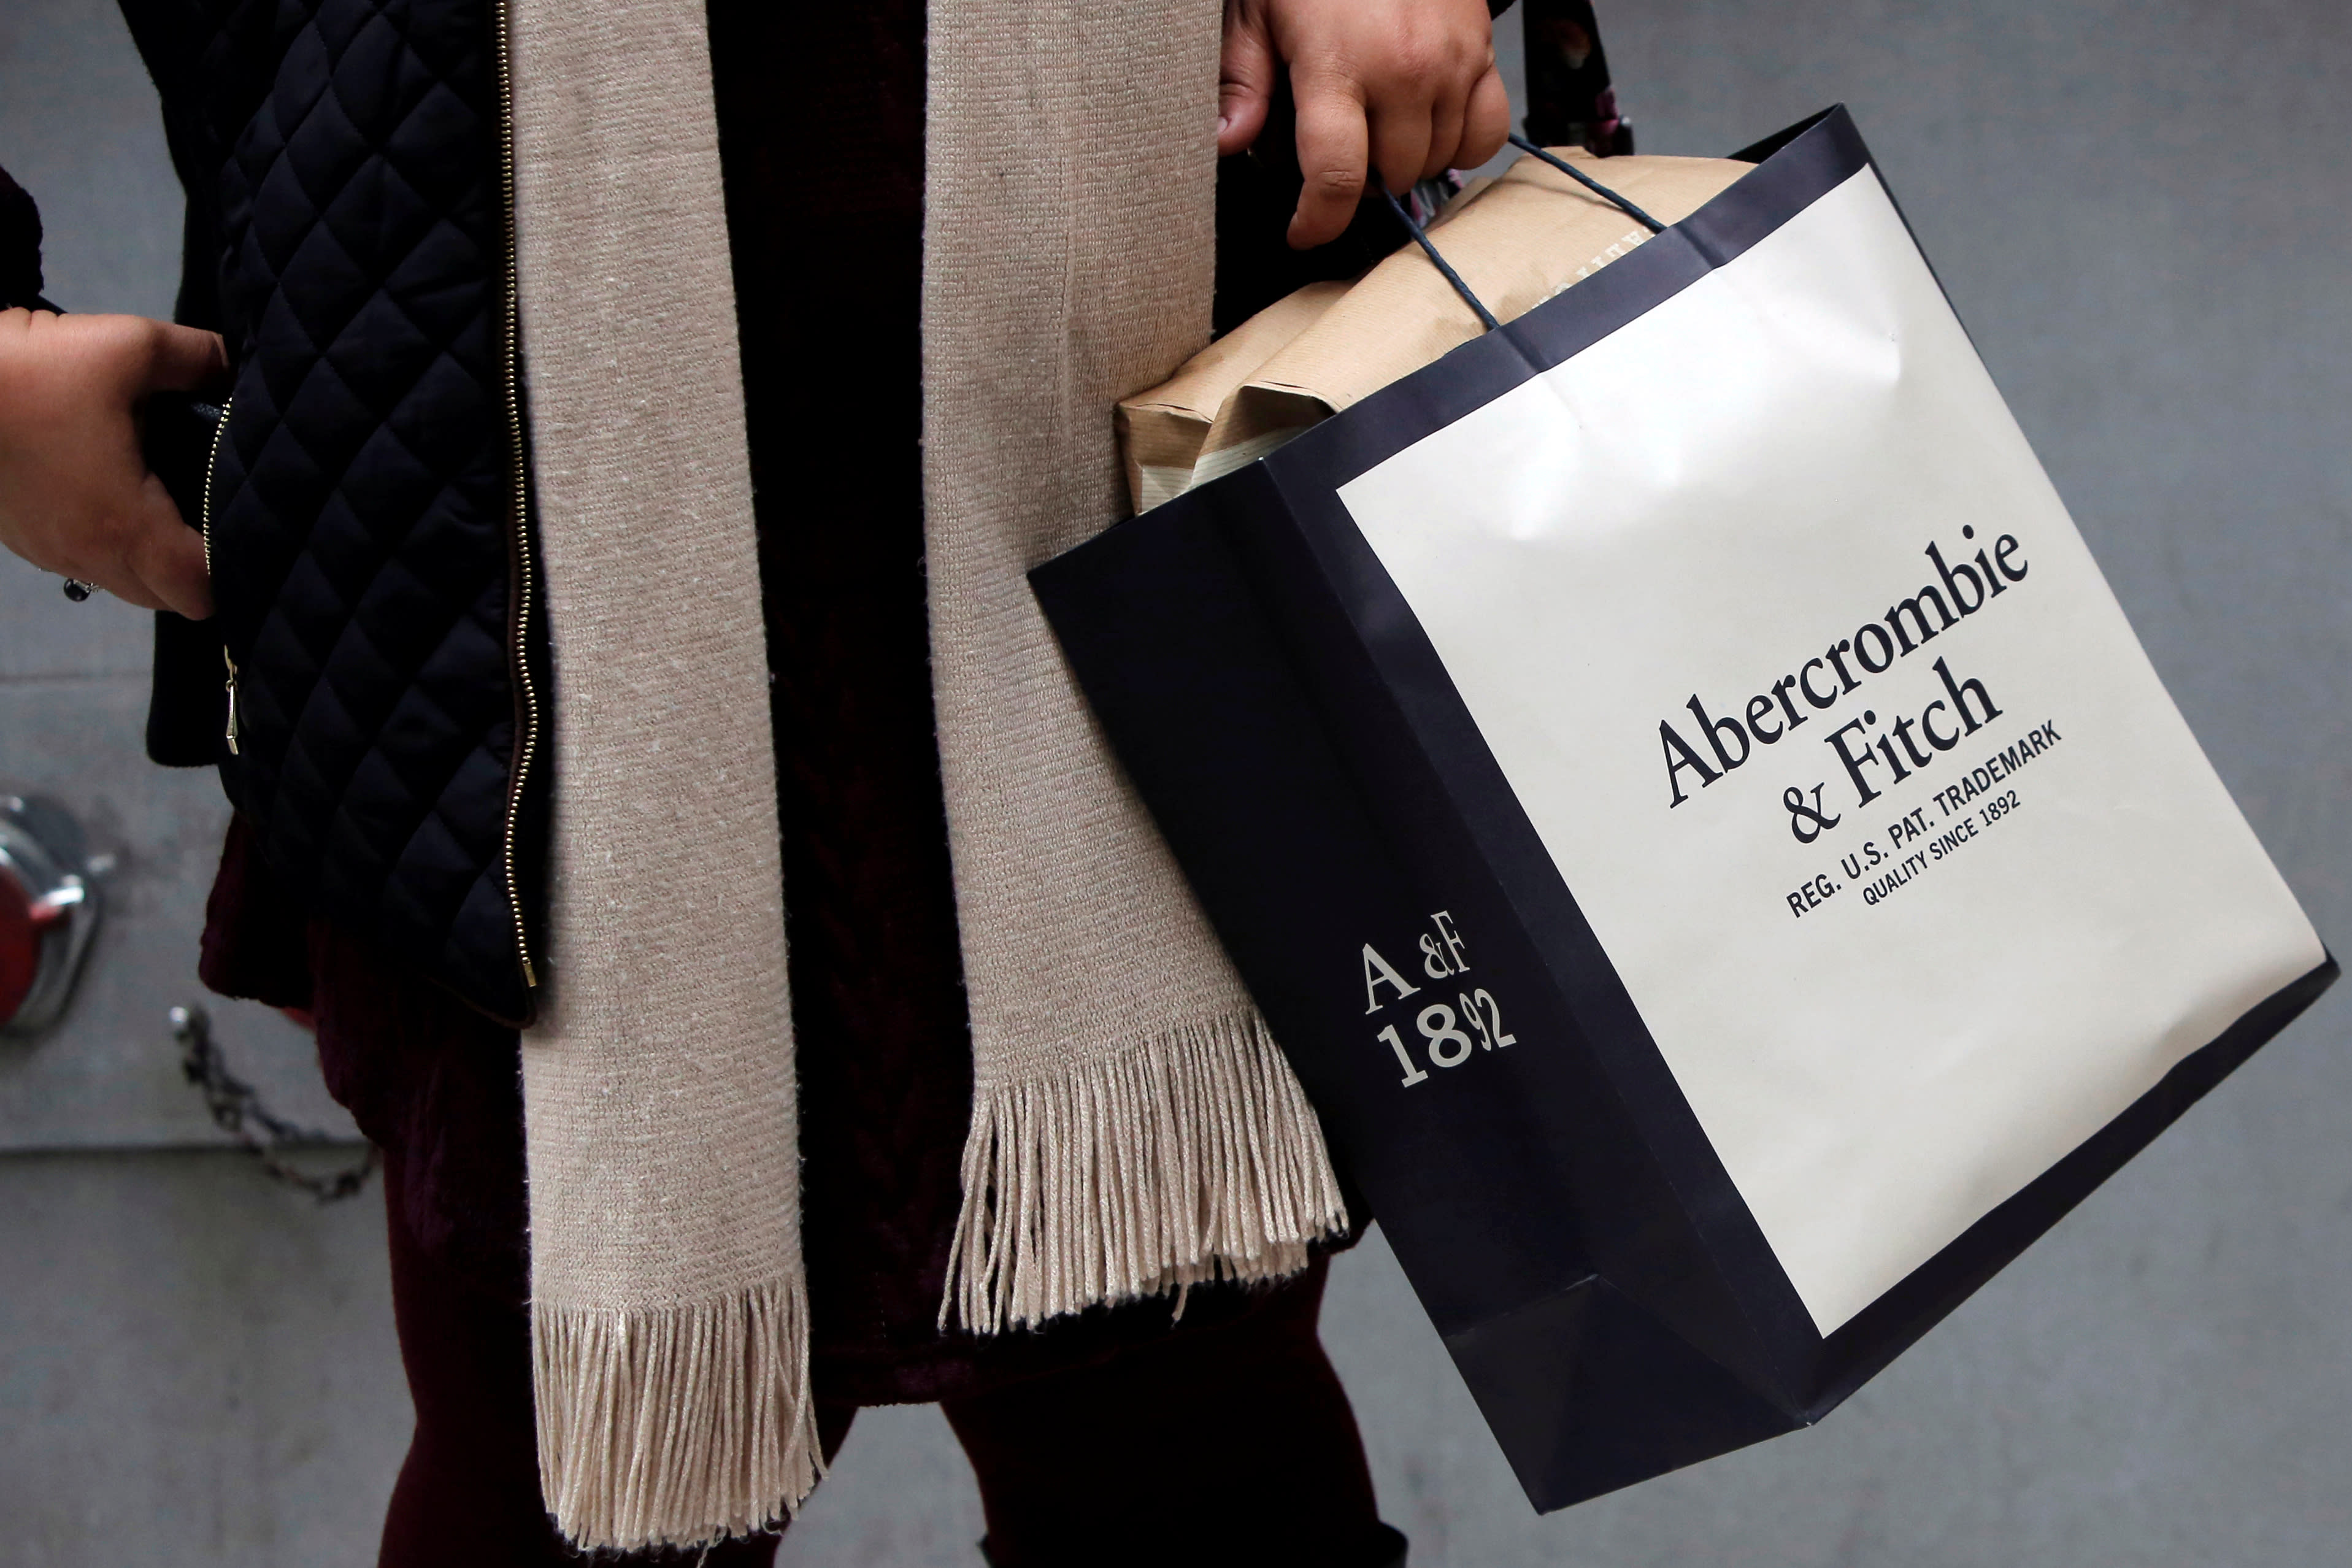 abercrombie and fitch supply chain